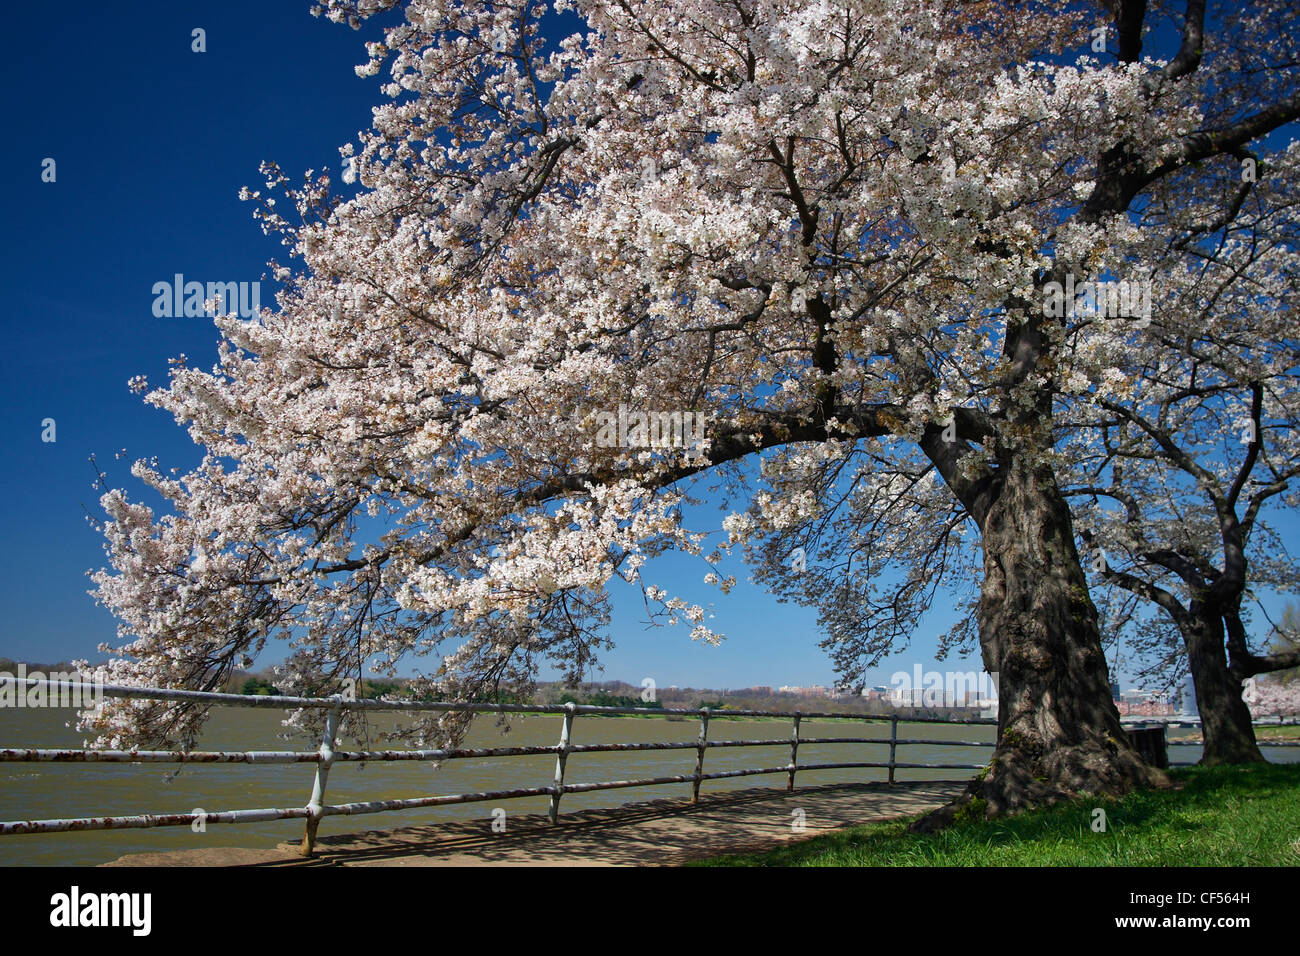 Blooming Japanese cherry blossom trees on the east bank of the Potomac River, Washington, DC. Stock Photo